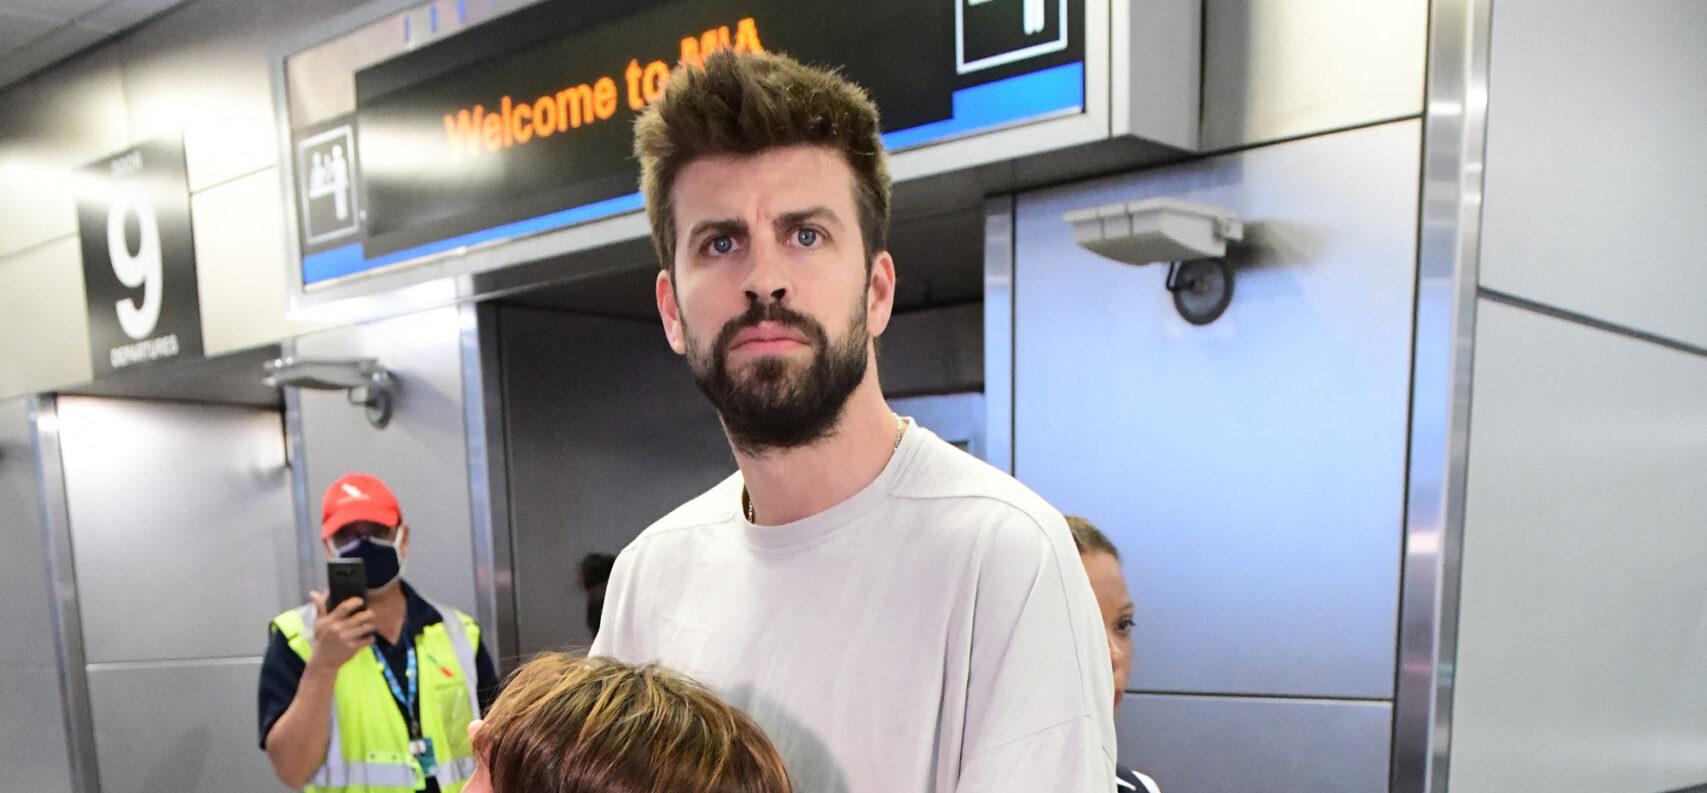 Gerard Pique arrives to Miami International airport with his two sons he shares with ex-wife Shakira